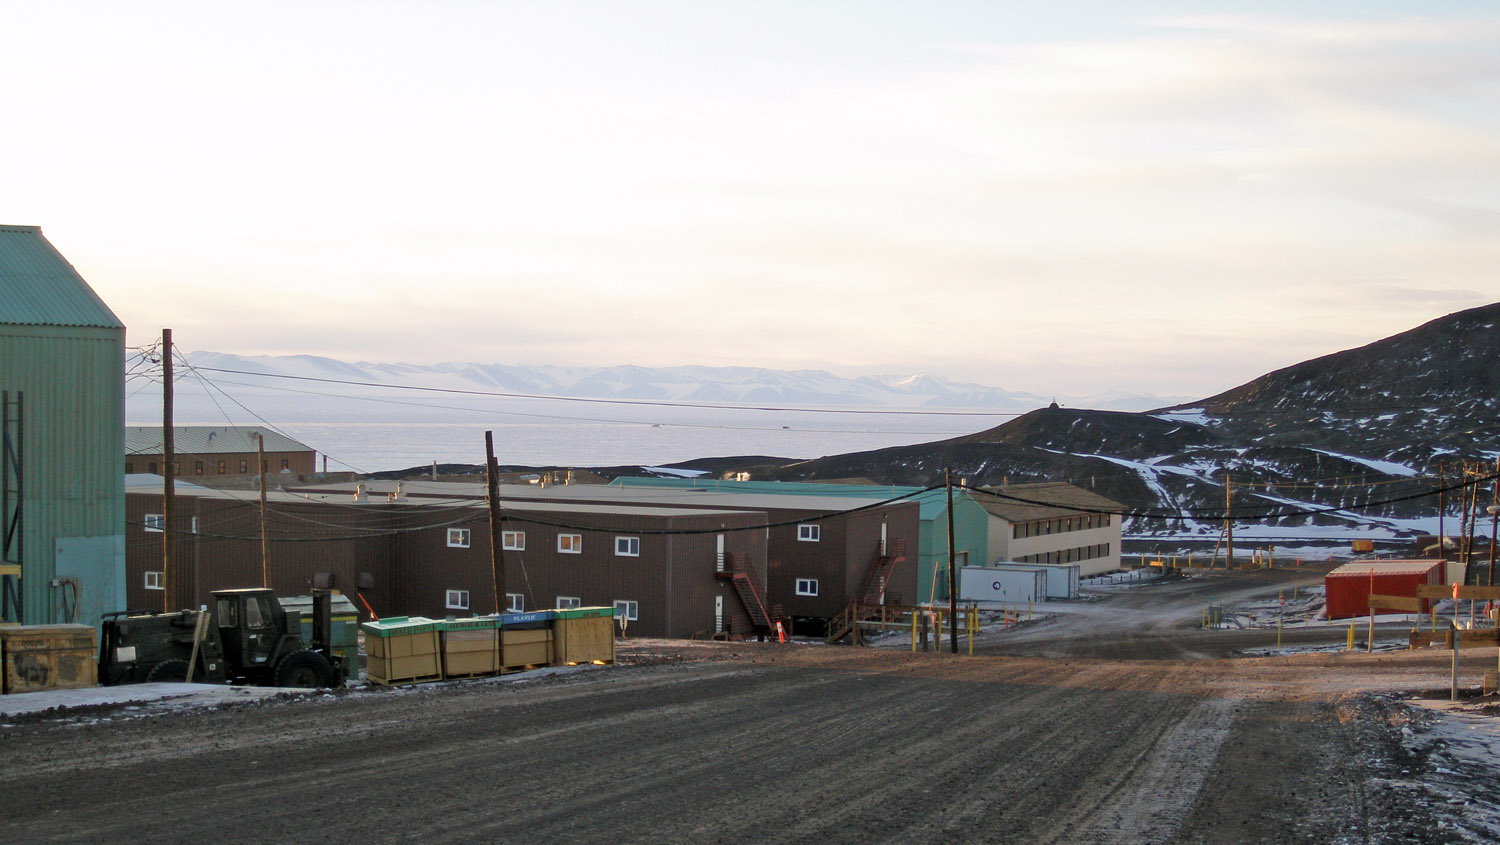 Evening (sort of) at McMurdo